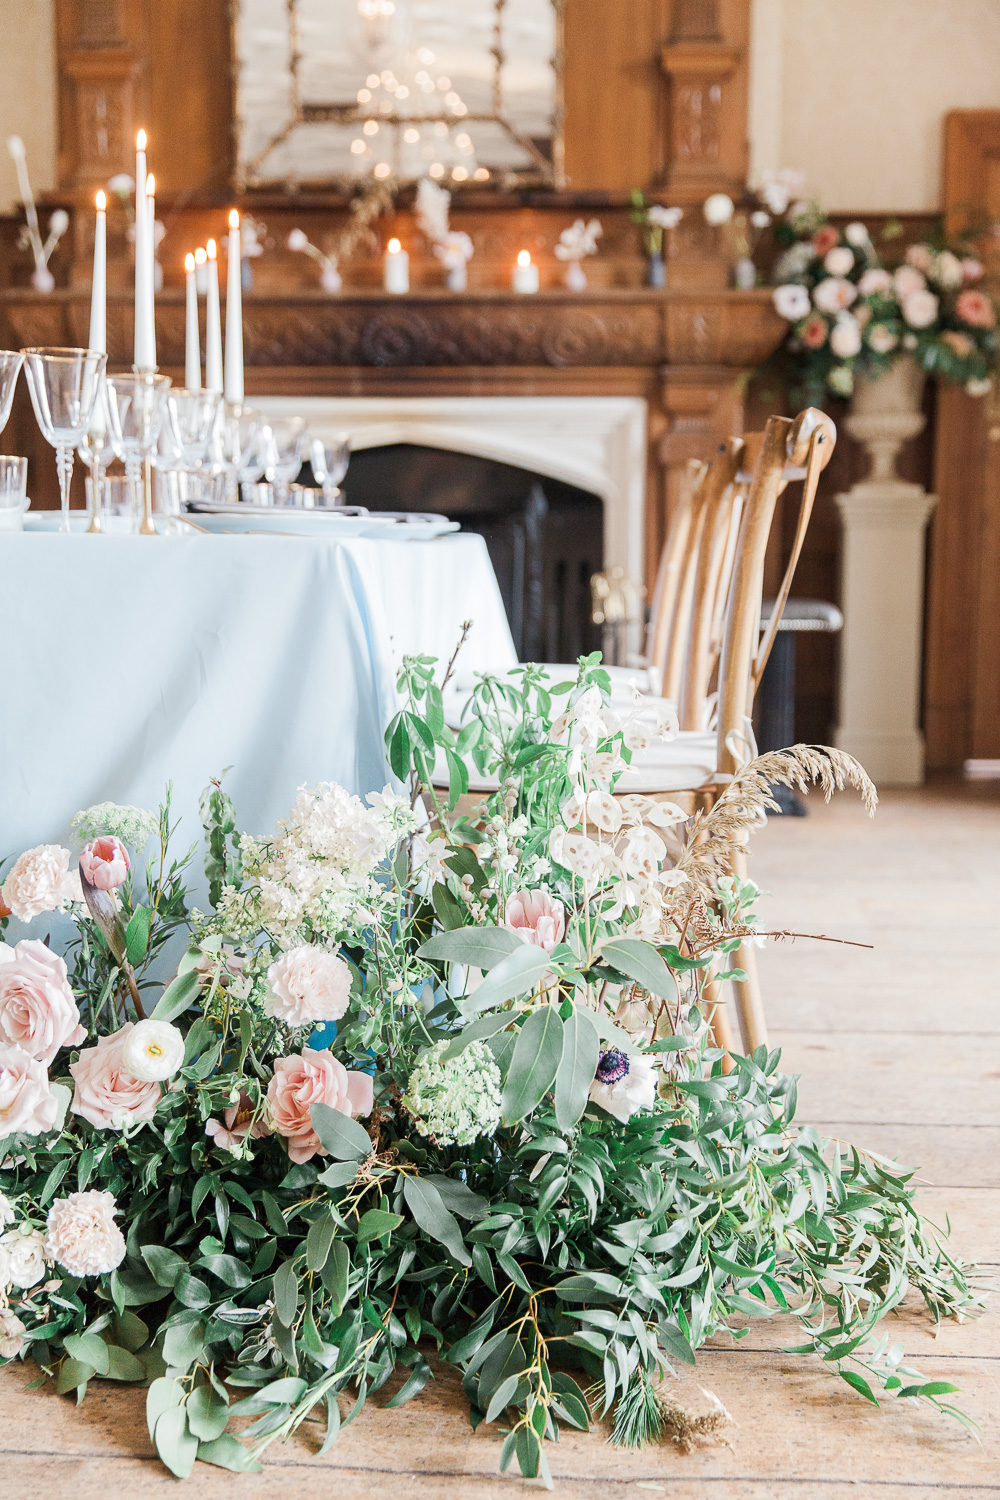 Wedding table with Spring flowers at Froyle Park wedding venue in the UK